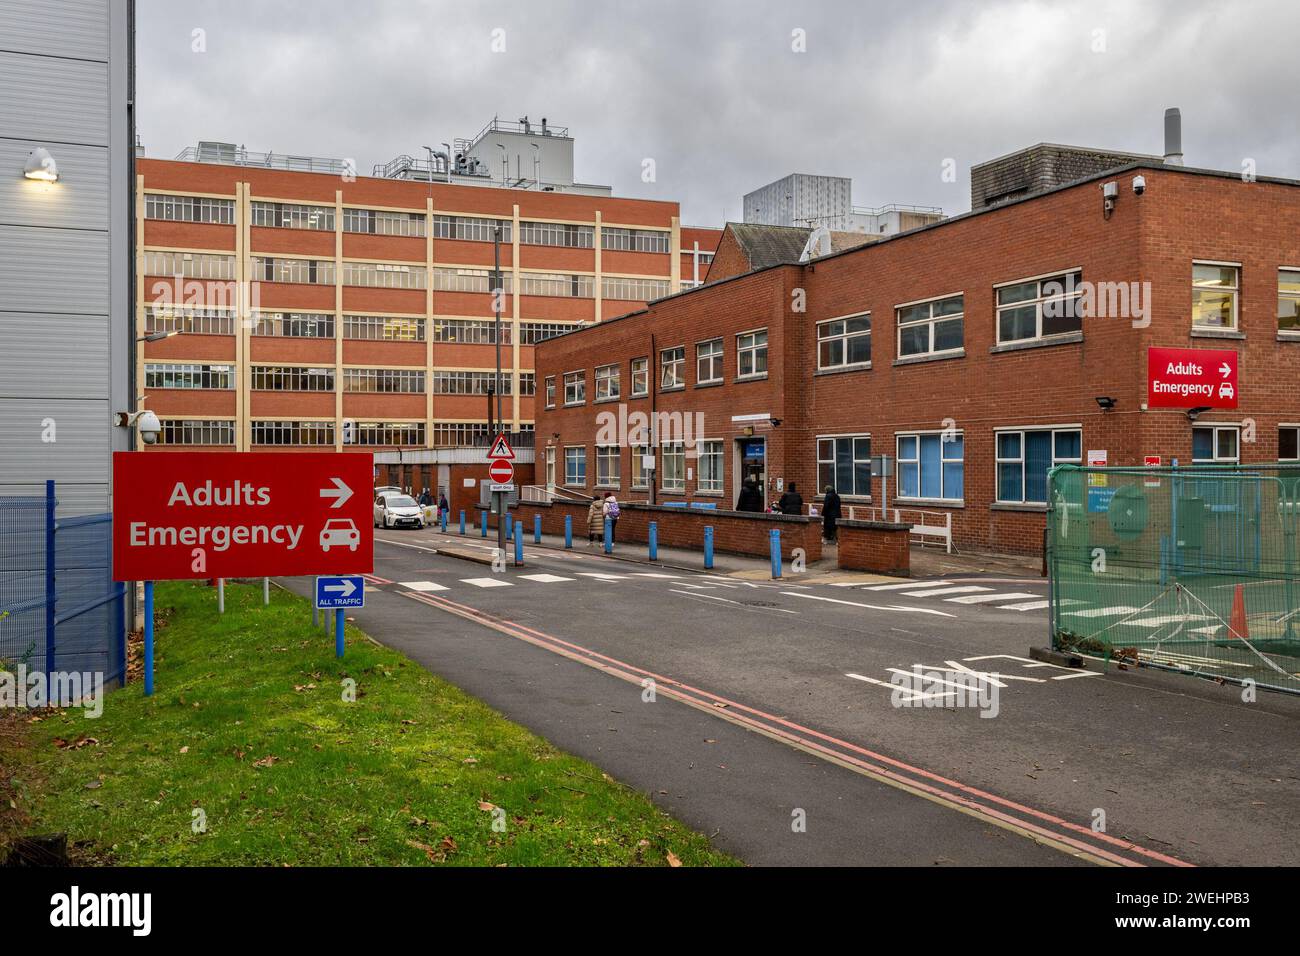 Leicester Royal Infirmary Hospital, Leicester, Royaume-Uni. Banque D'Images